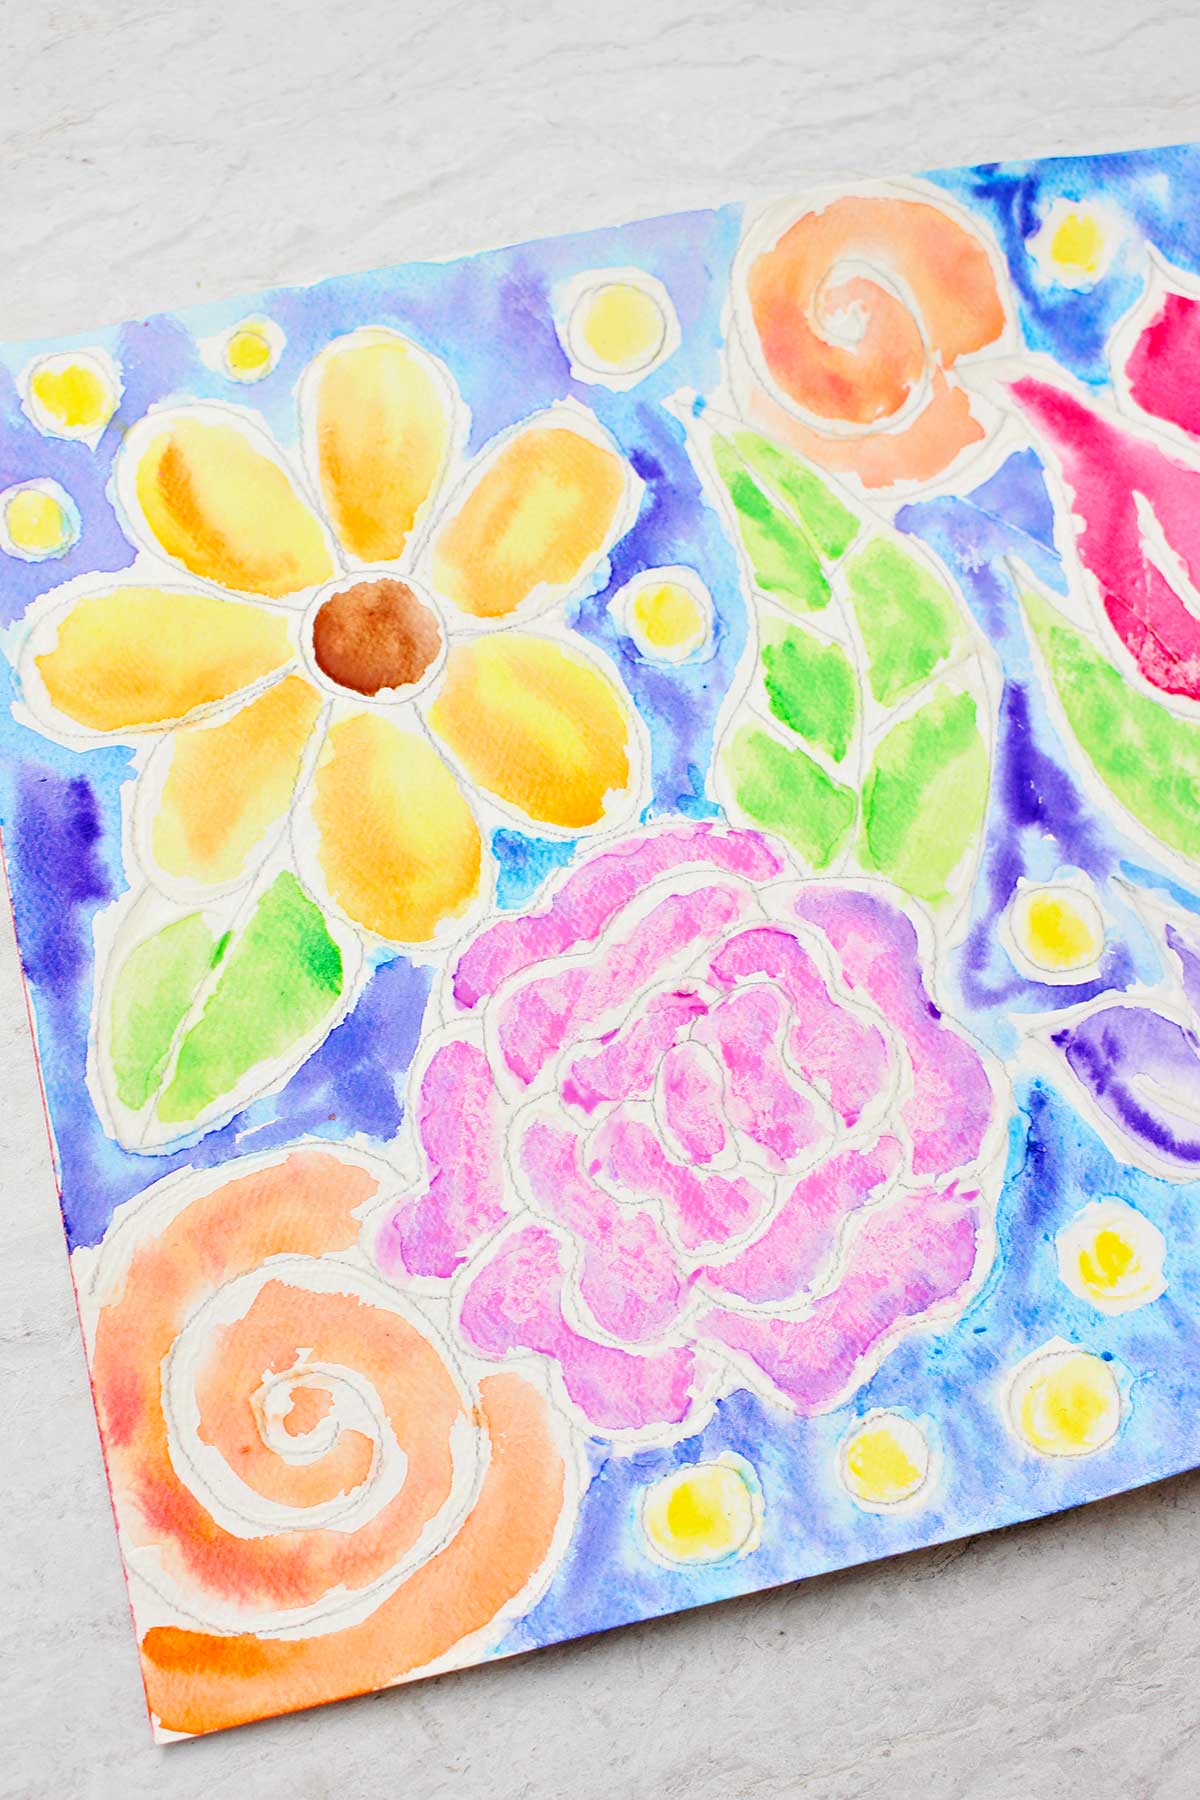 Close up view of a couple of flowers on the left side of the glue line painting.